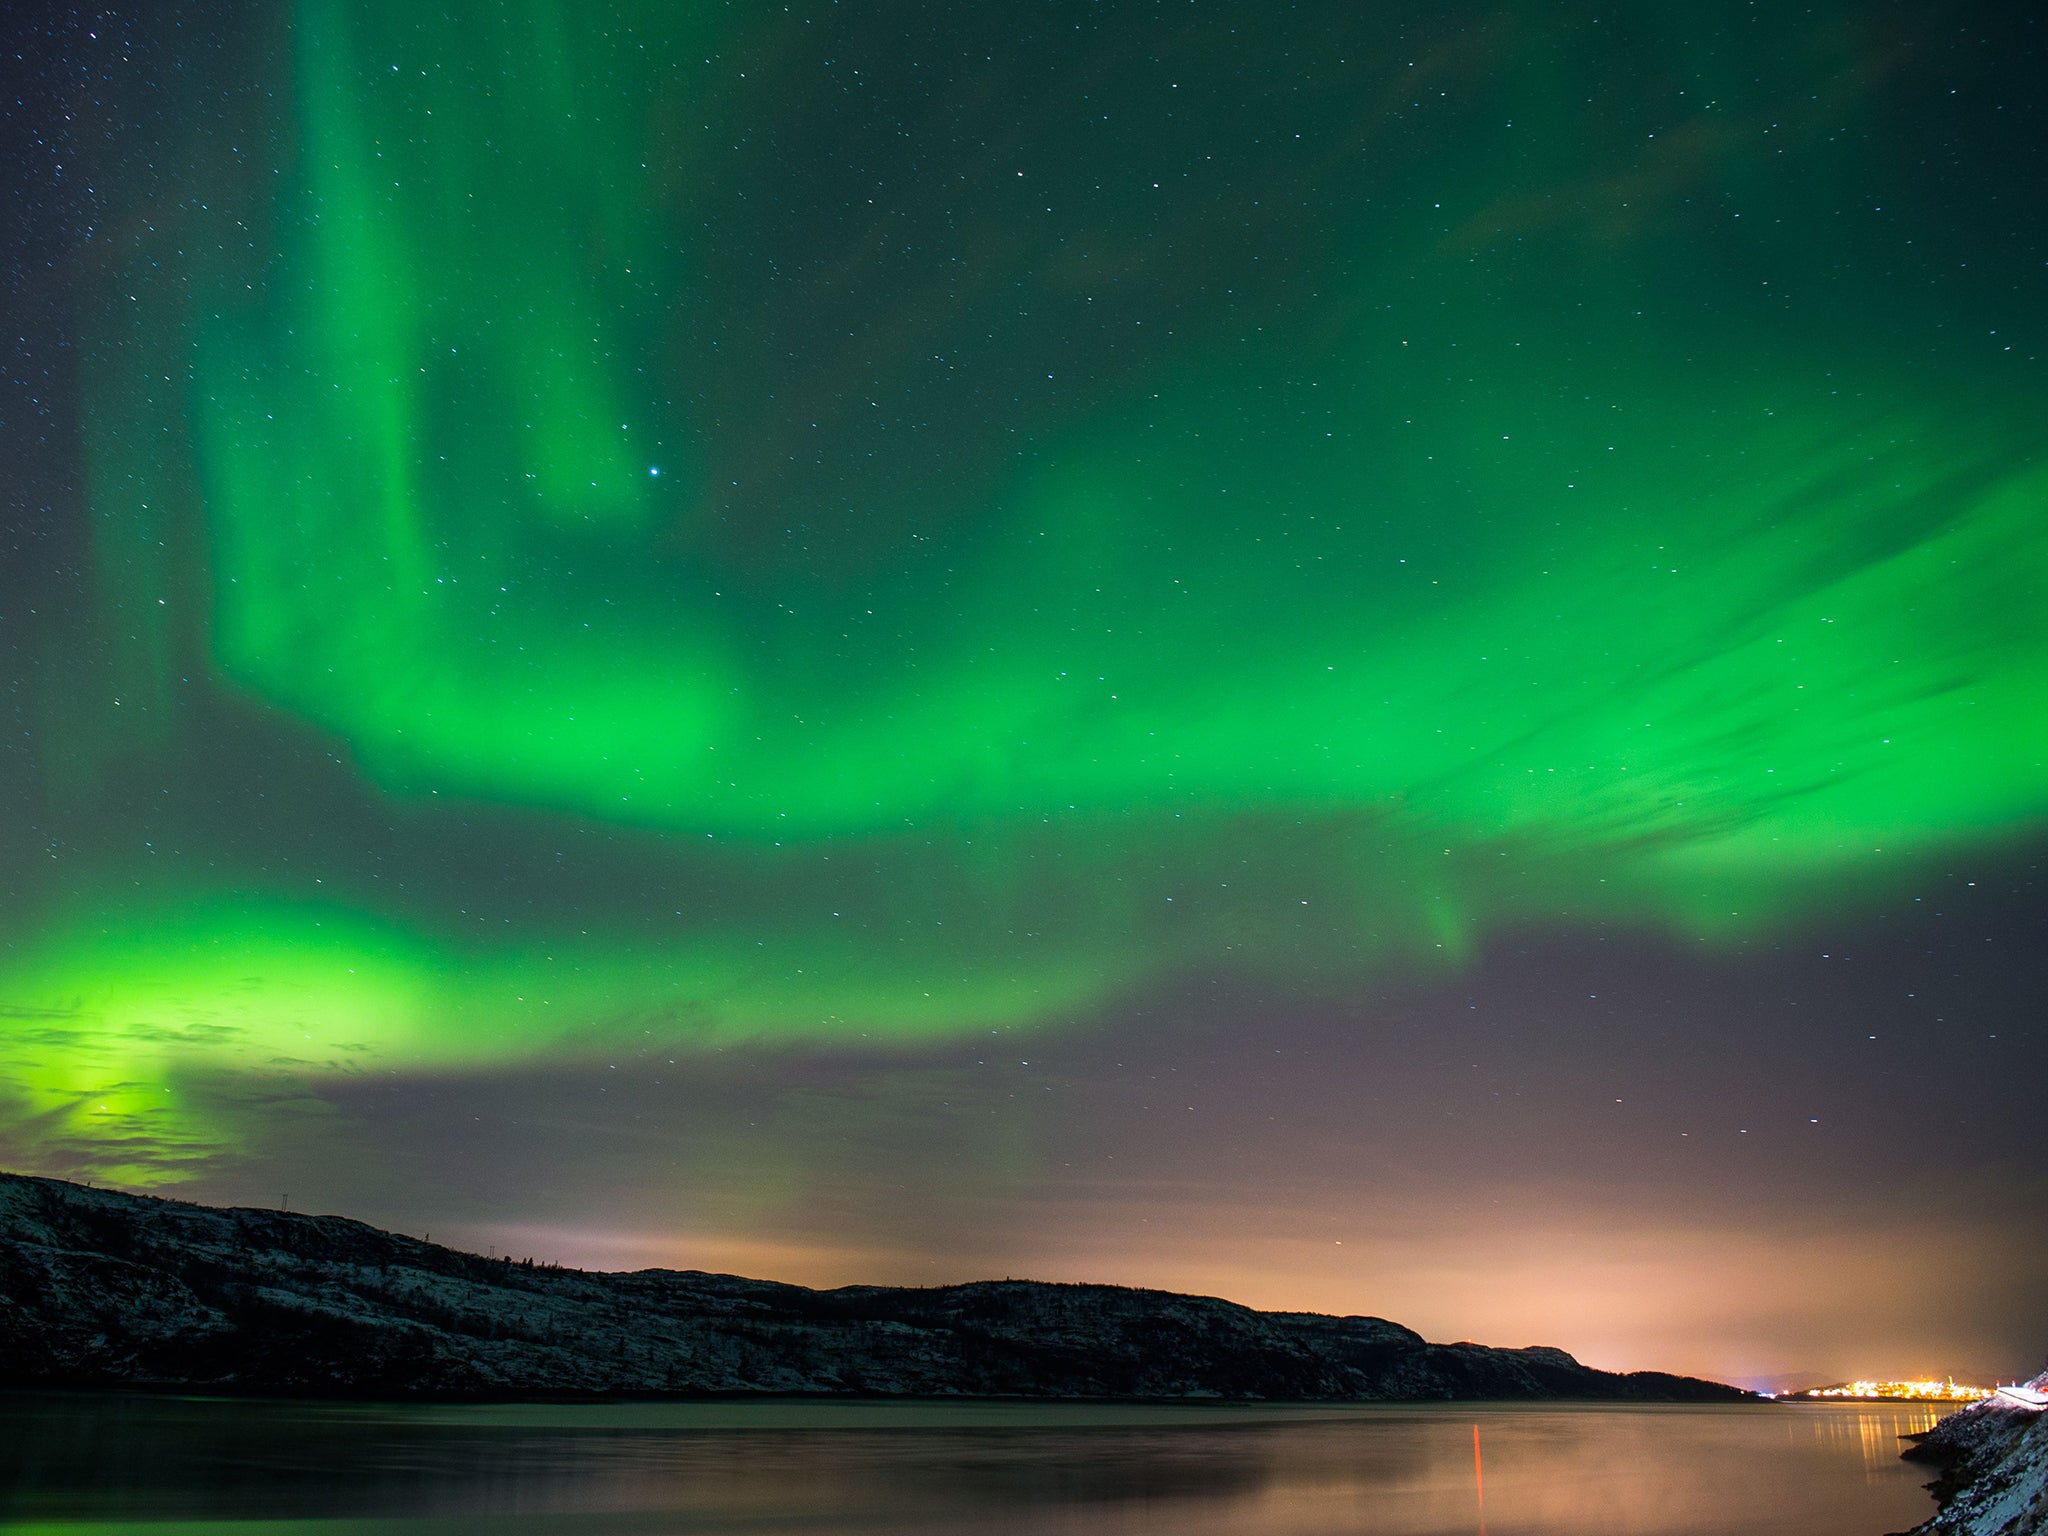 The Aurora Borealis or Northern Lights illuminate the night sky, near the town of Kirkenes in northern Norway